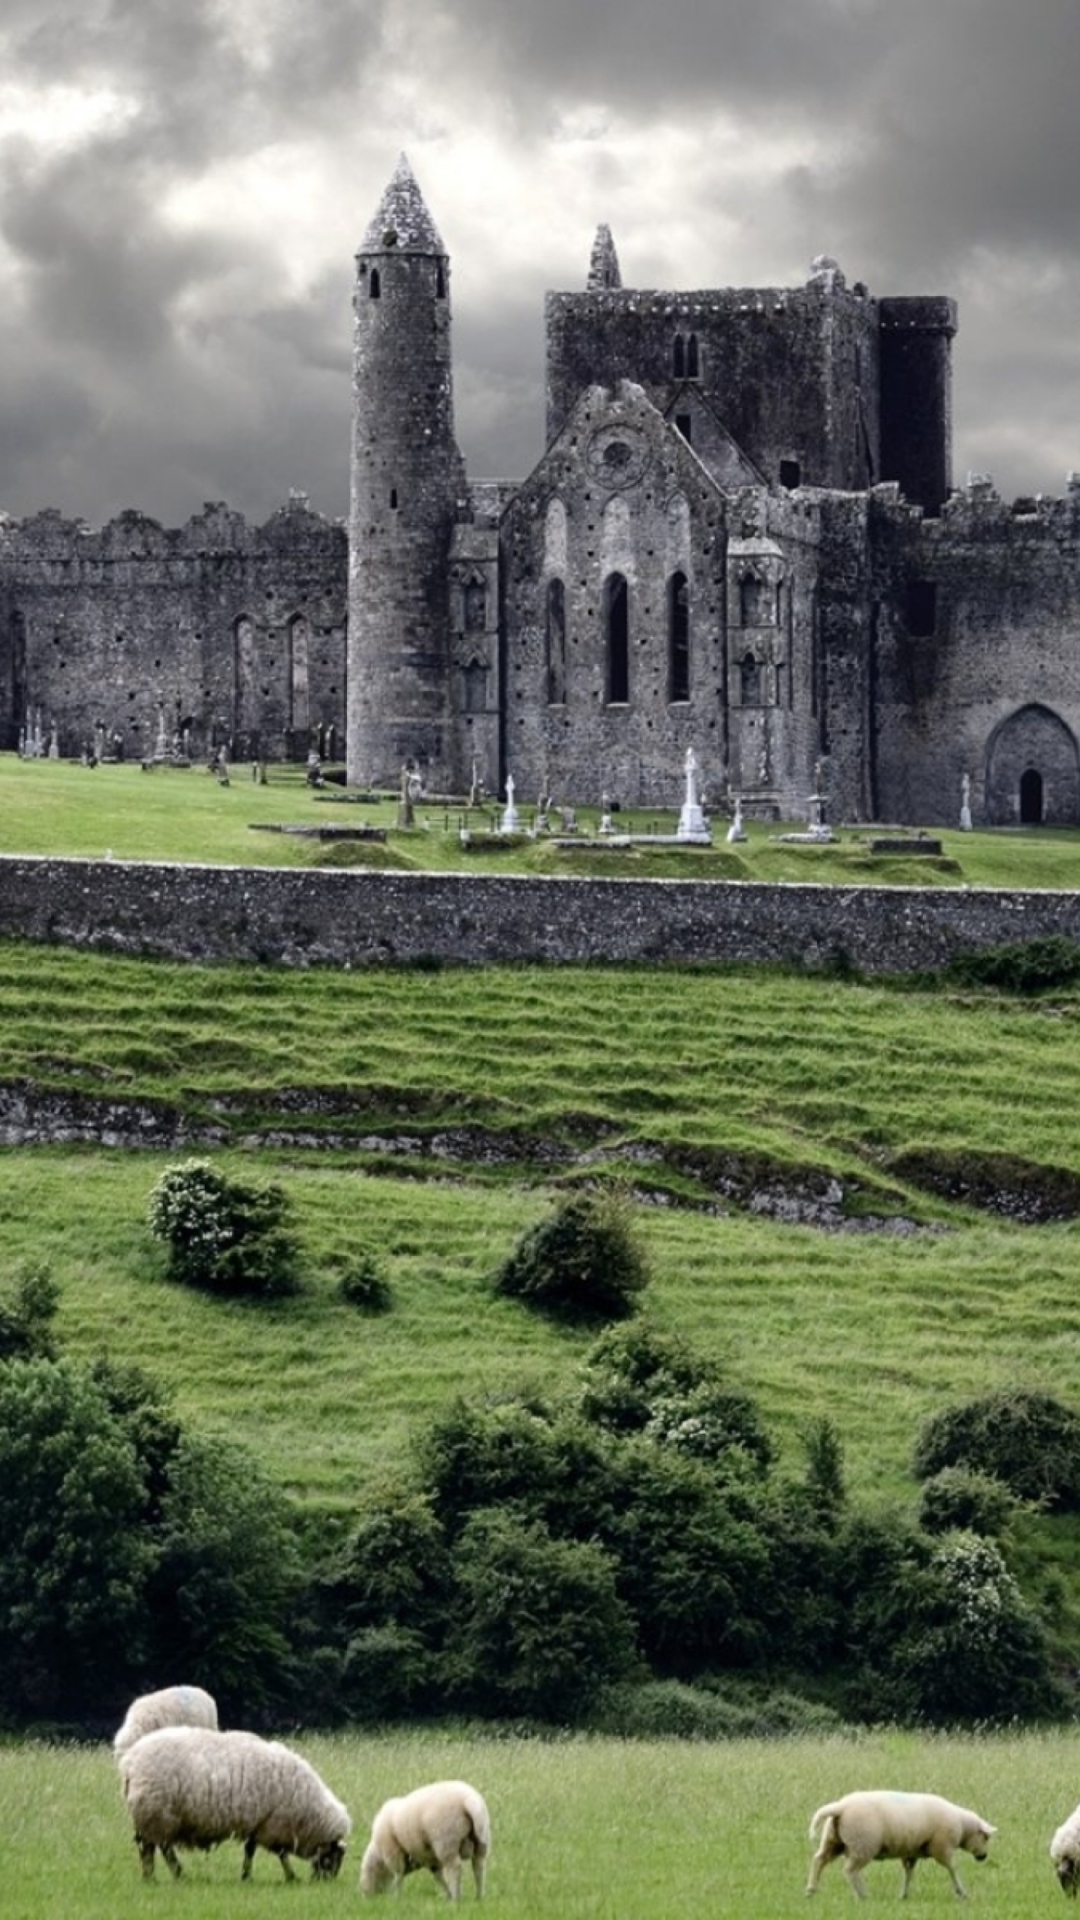 Ireland Landscape With Sheep And Castle wallpaper 1080x1920